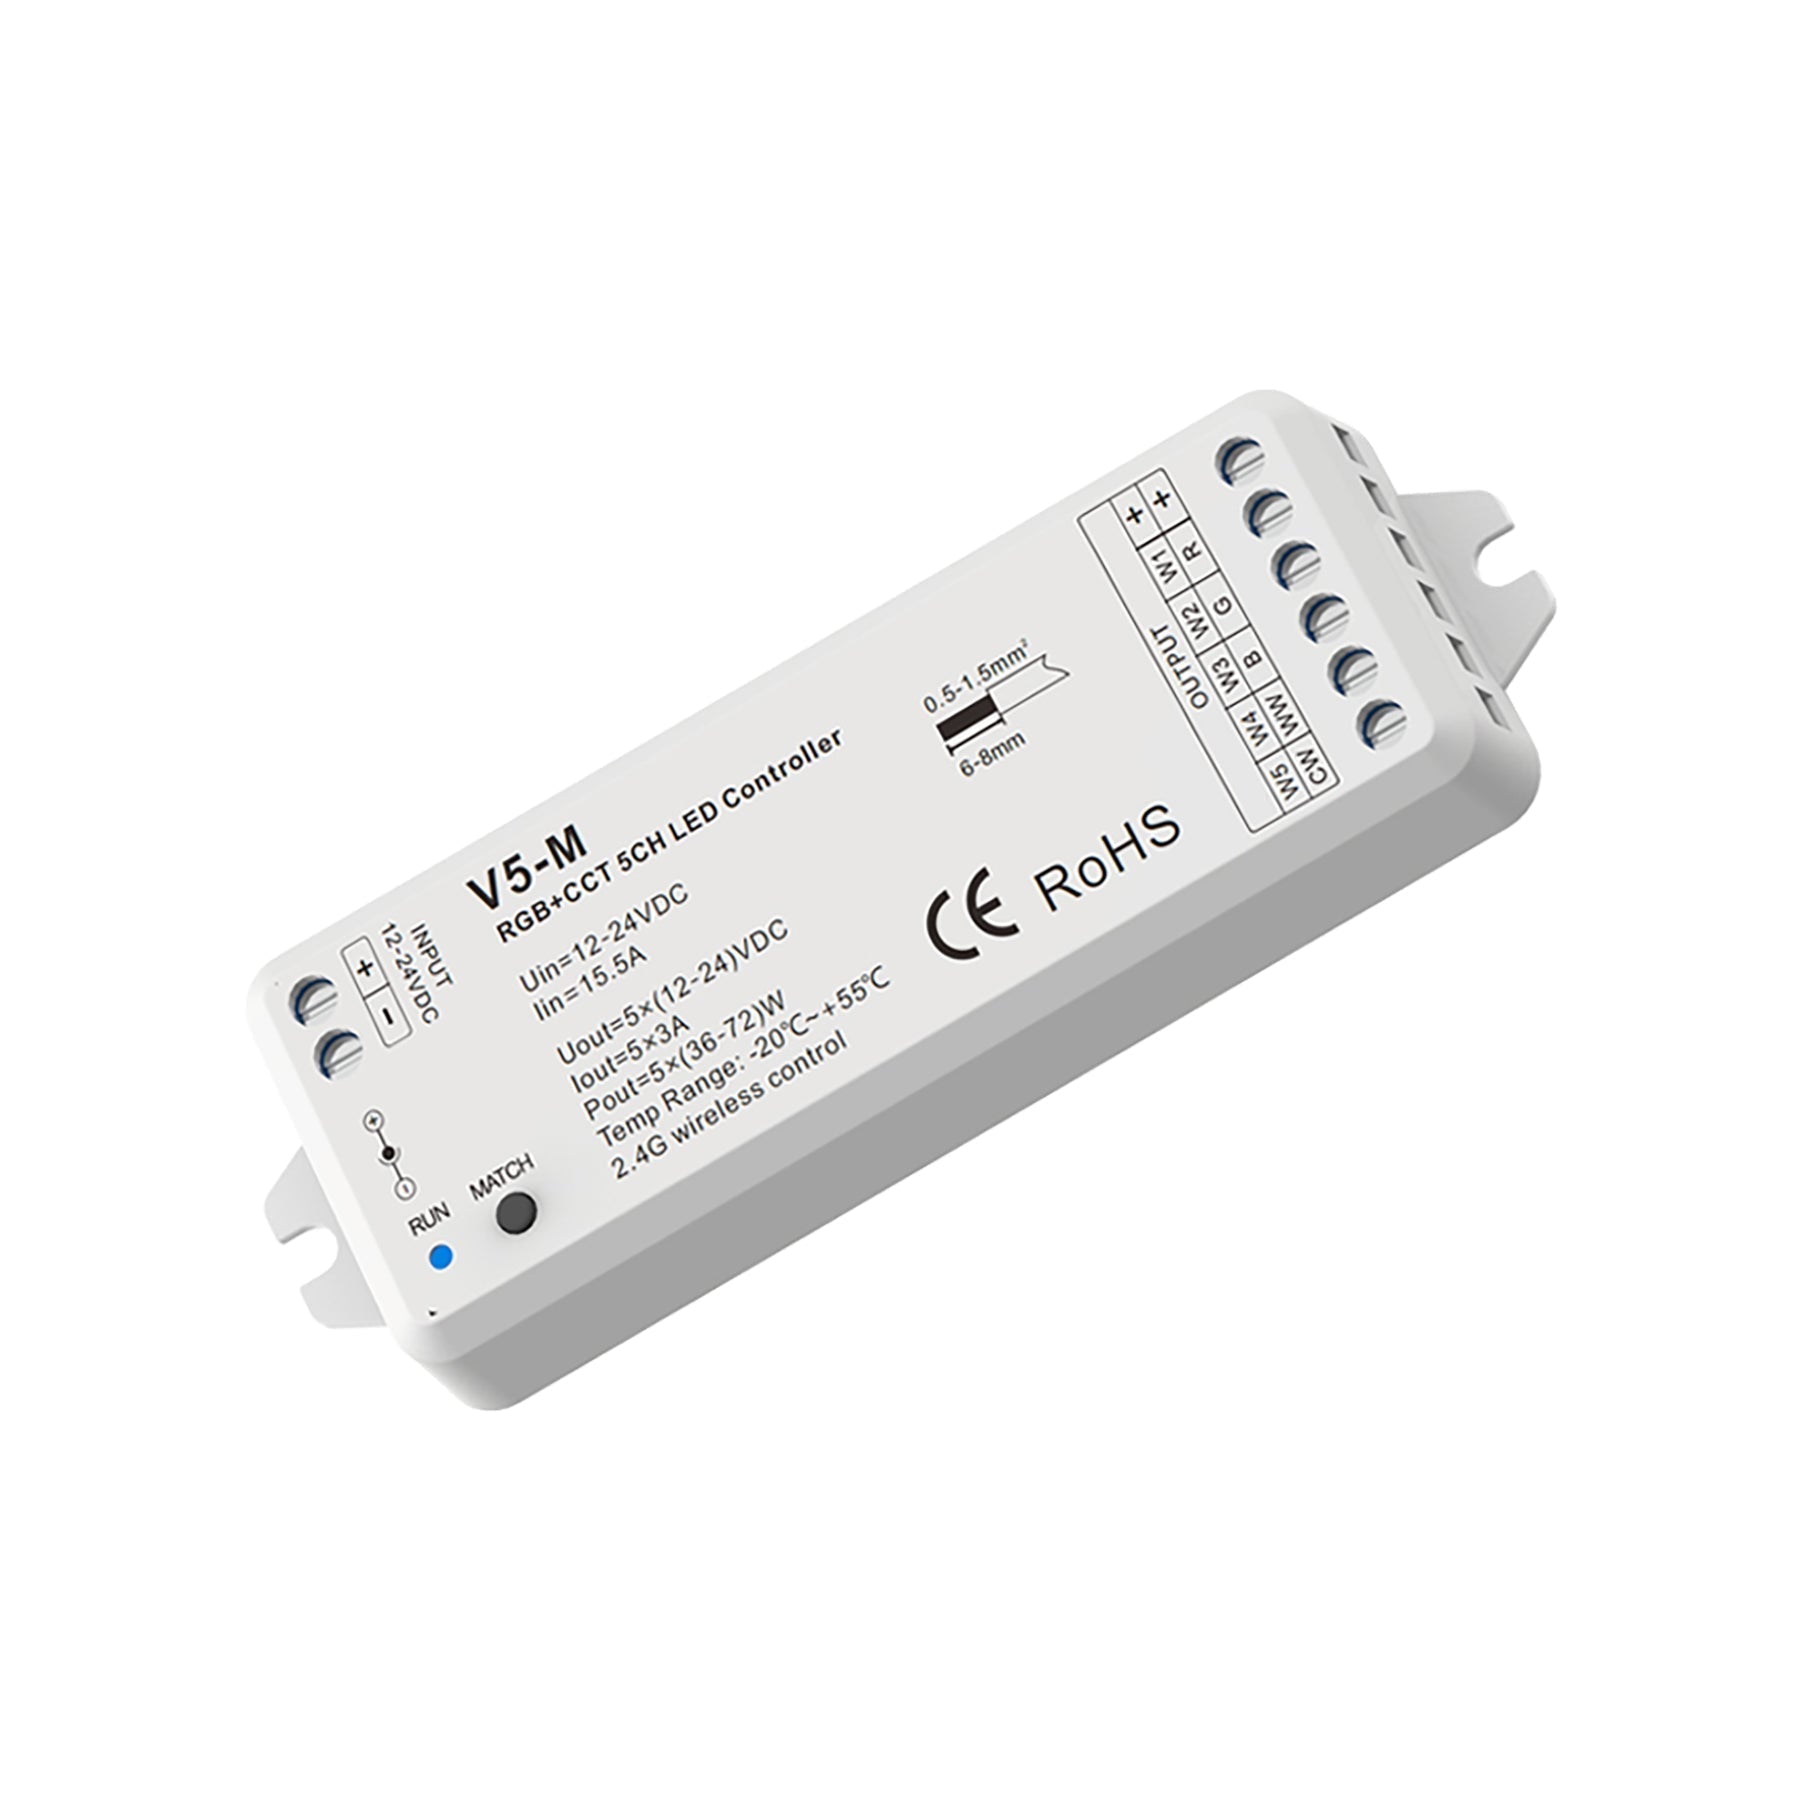 G.W.S. LED LED 12-24V DC RGB+CCT Controller V5-M + 1 Zone Panel Remote Control 1*CR2032 Battery TW5